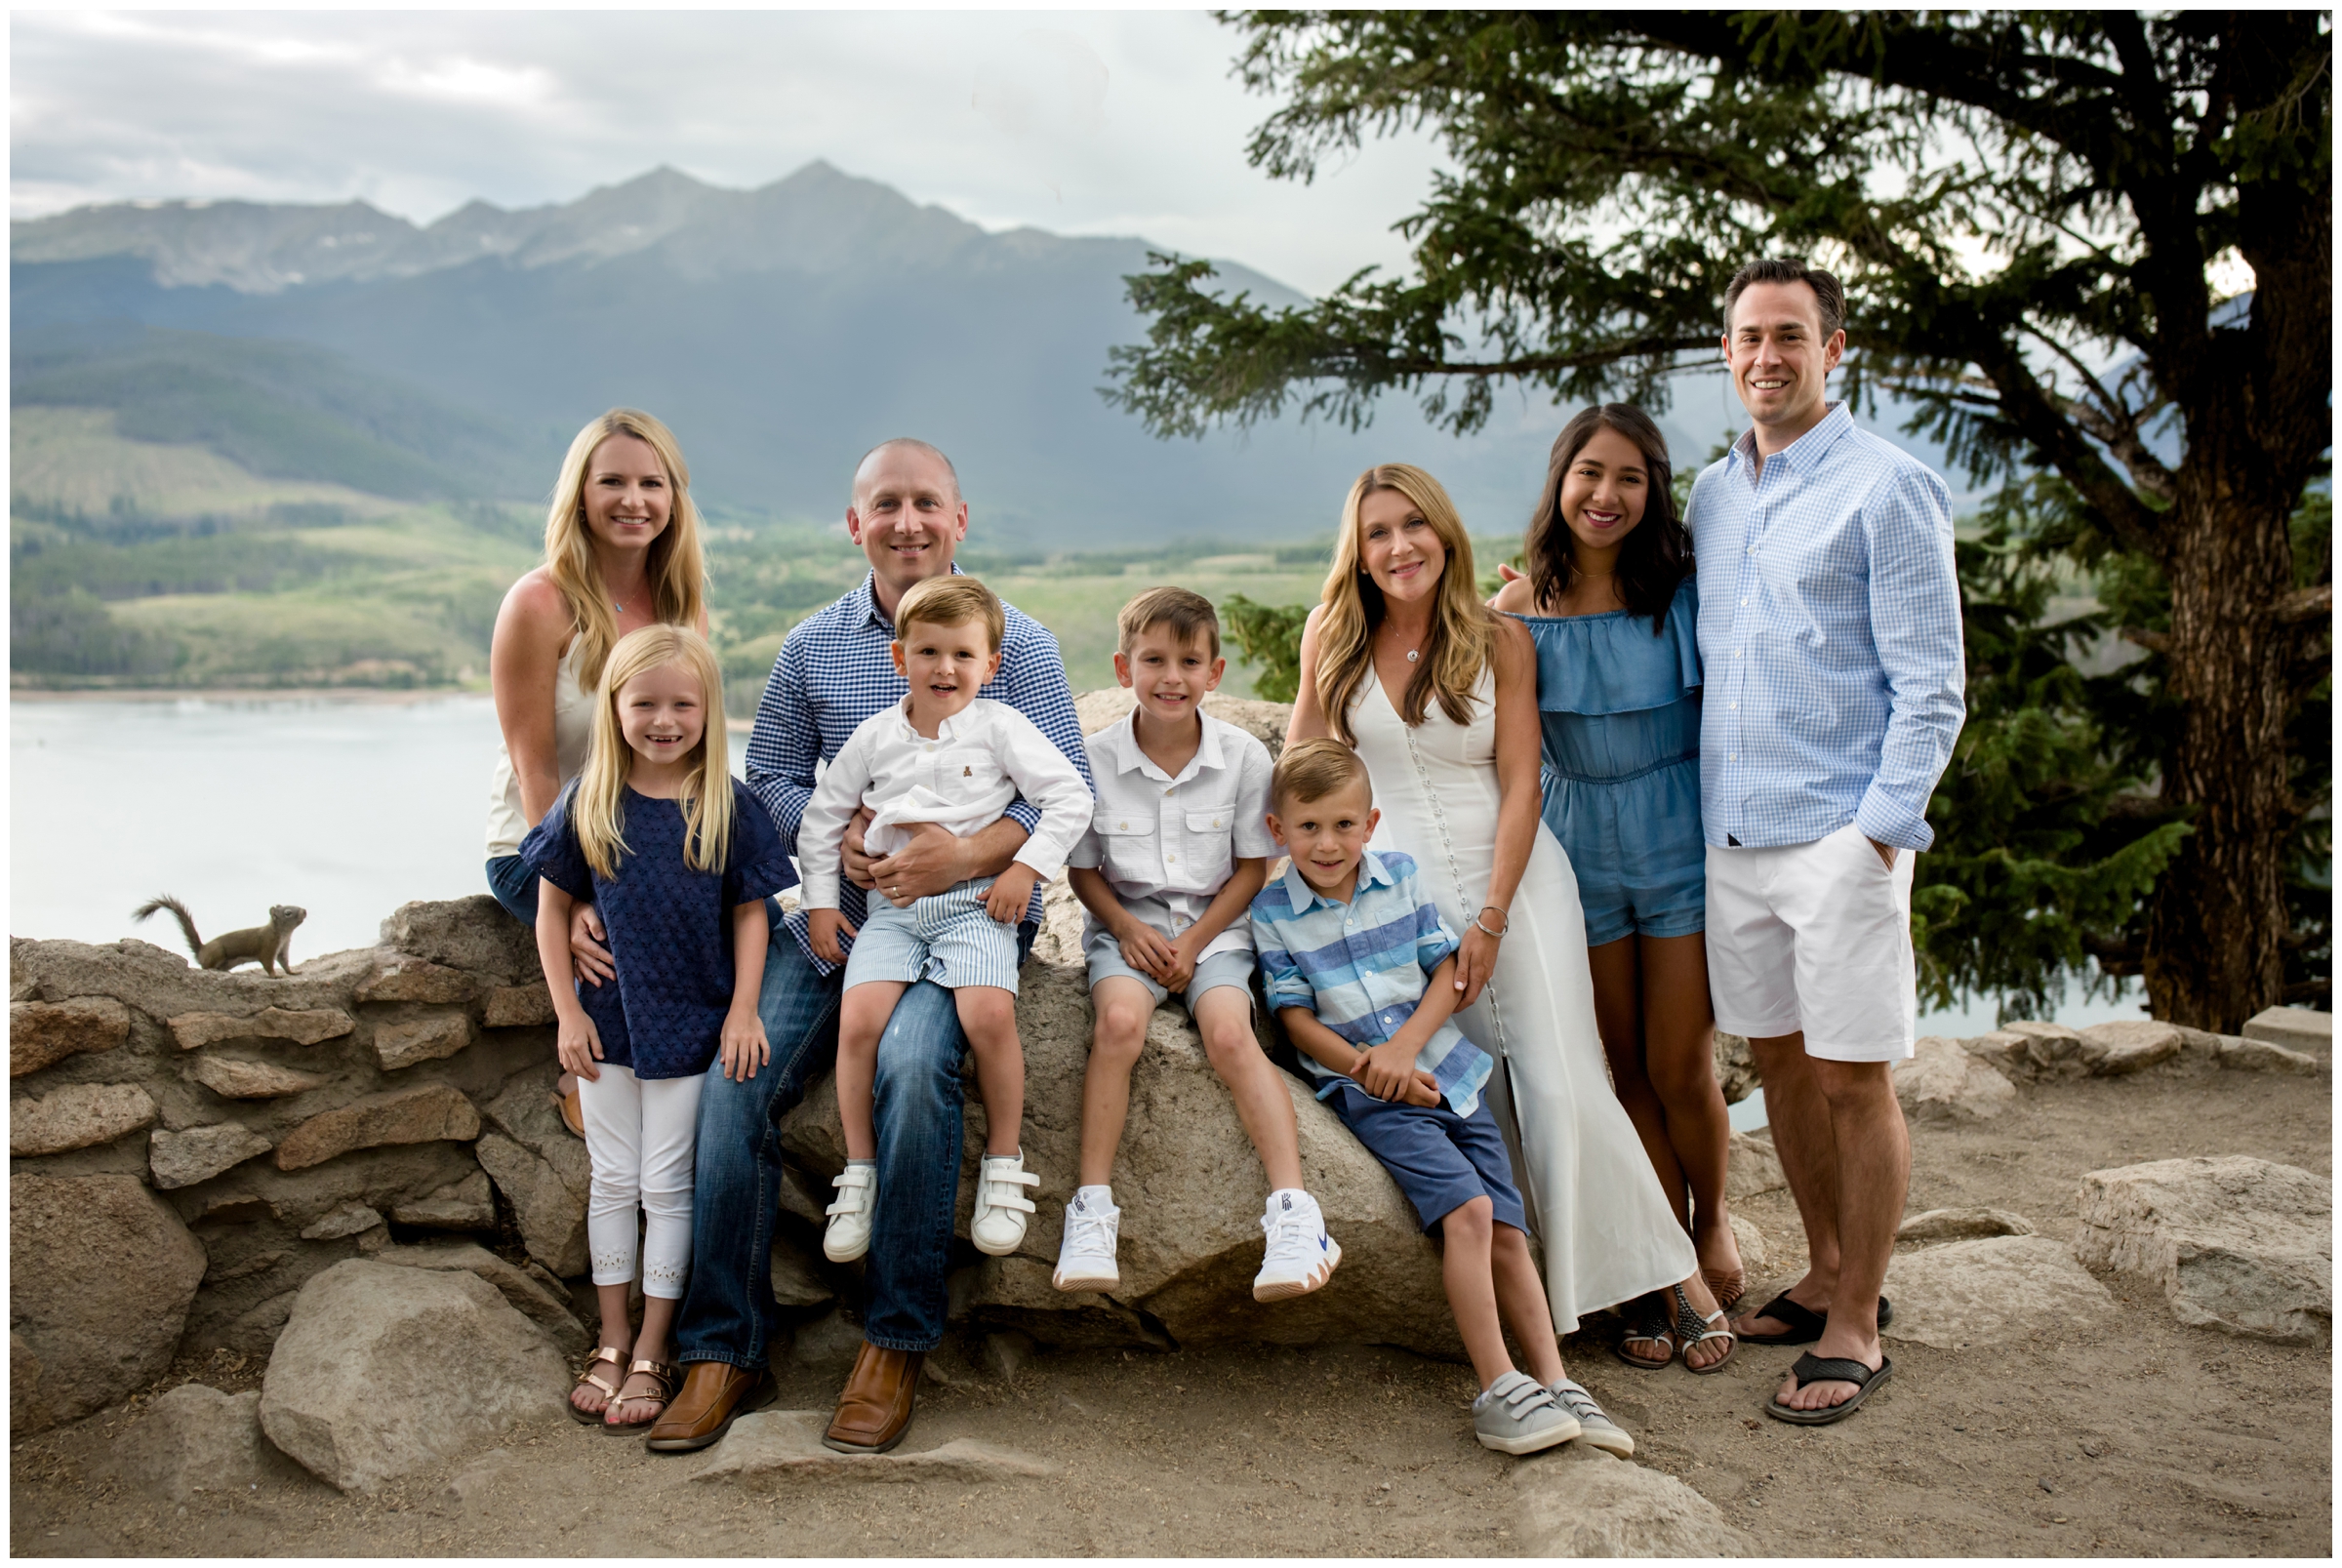 Summit County family photos by Breckenridge Colorado portrait photographer Plum Pretty Photography. Sapphire Point Overlook summer family pictures.